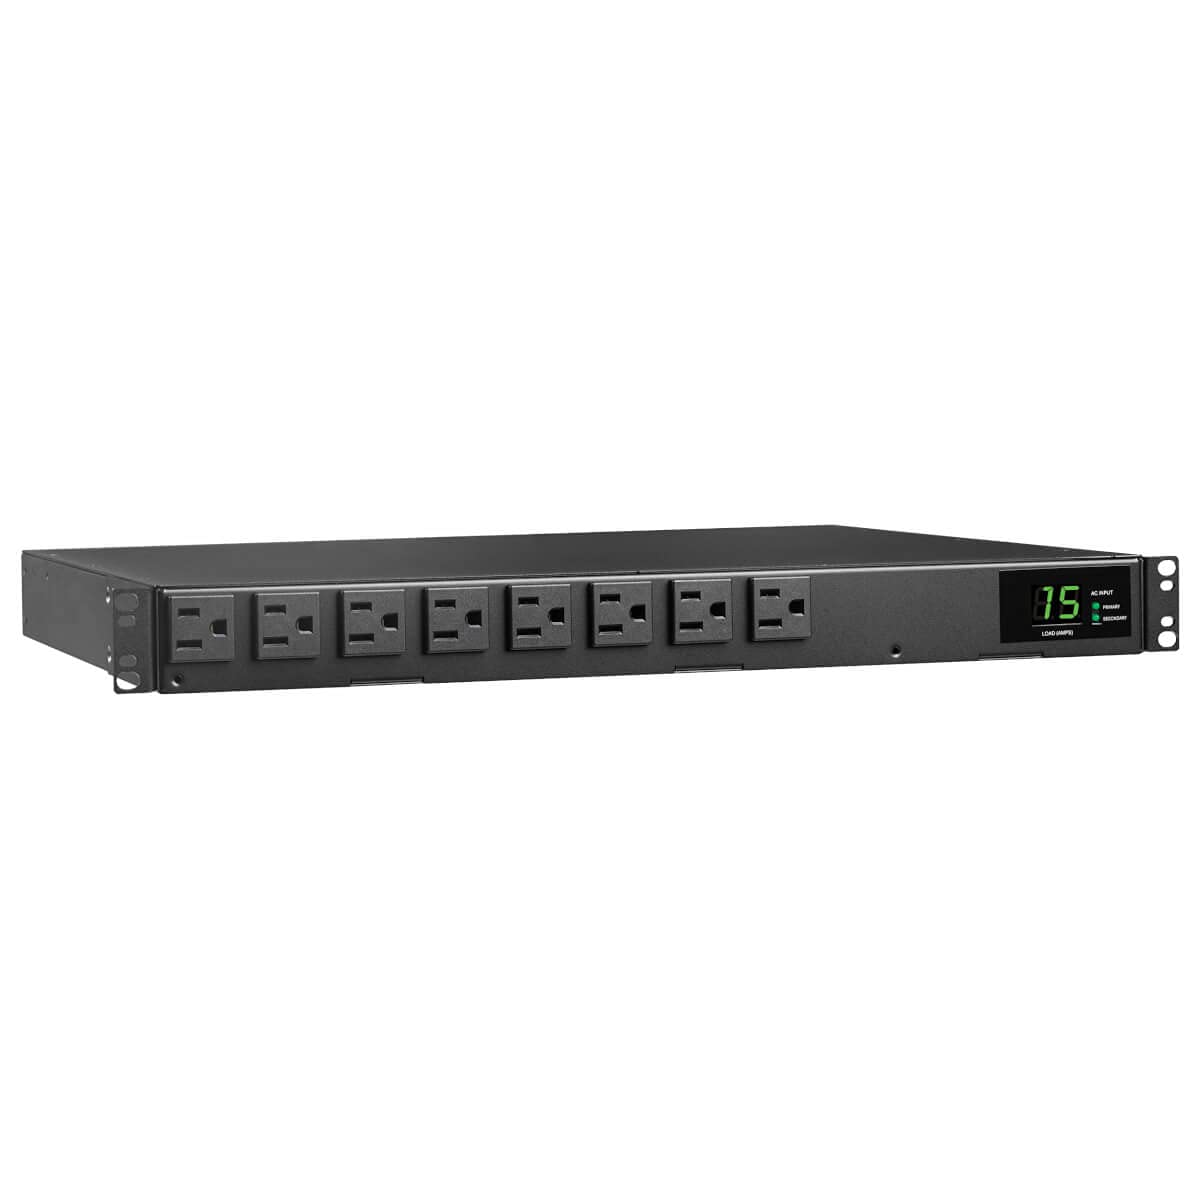 Tripp Lite Metered PDU, Auto-Transfer Switch (ATS), 15A, 120V, 1.44kW, Single-Phase - 8 Outlets (5-15R), Dual 12ft 5-15P Input Cords - 1U Rackmount...